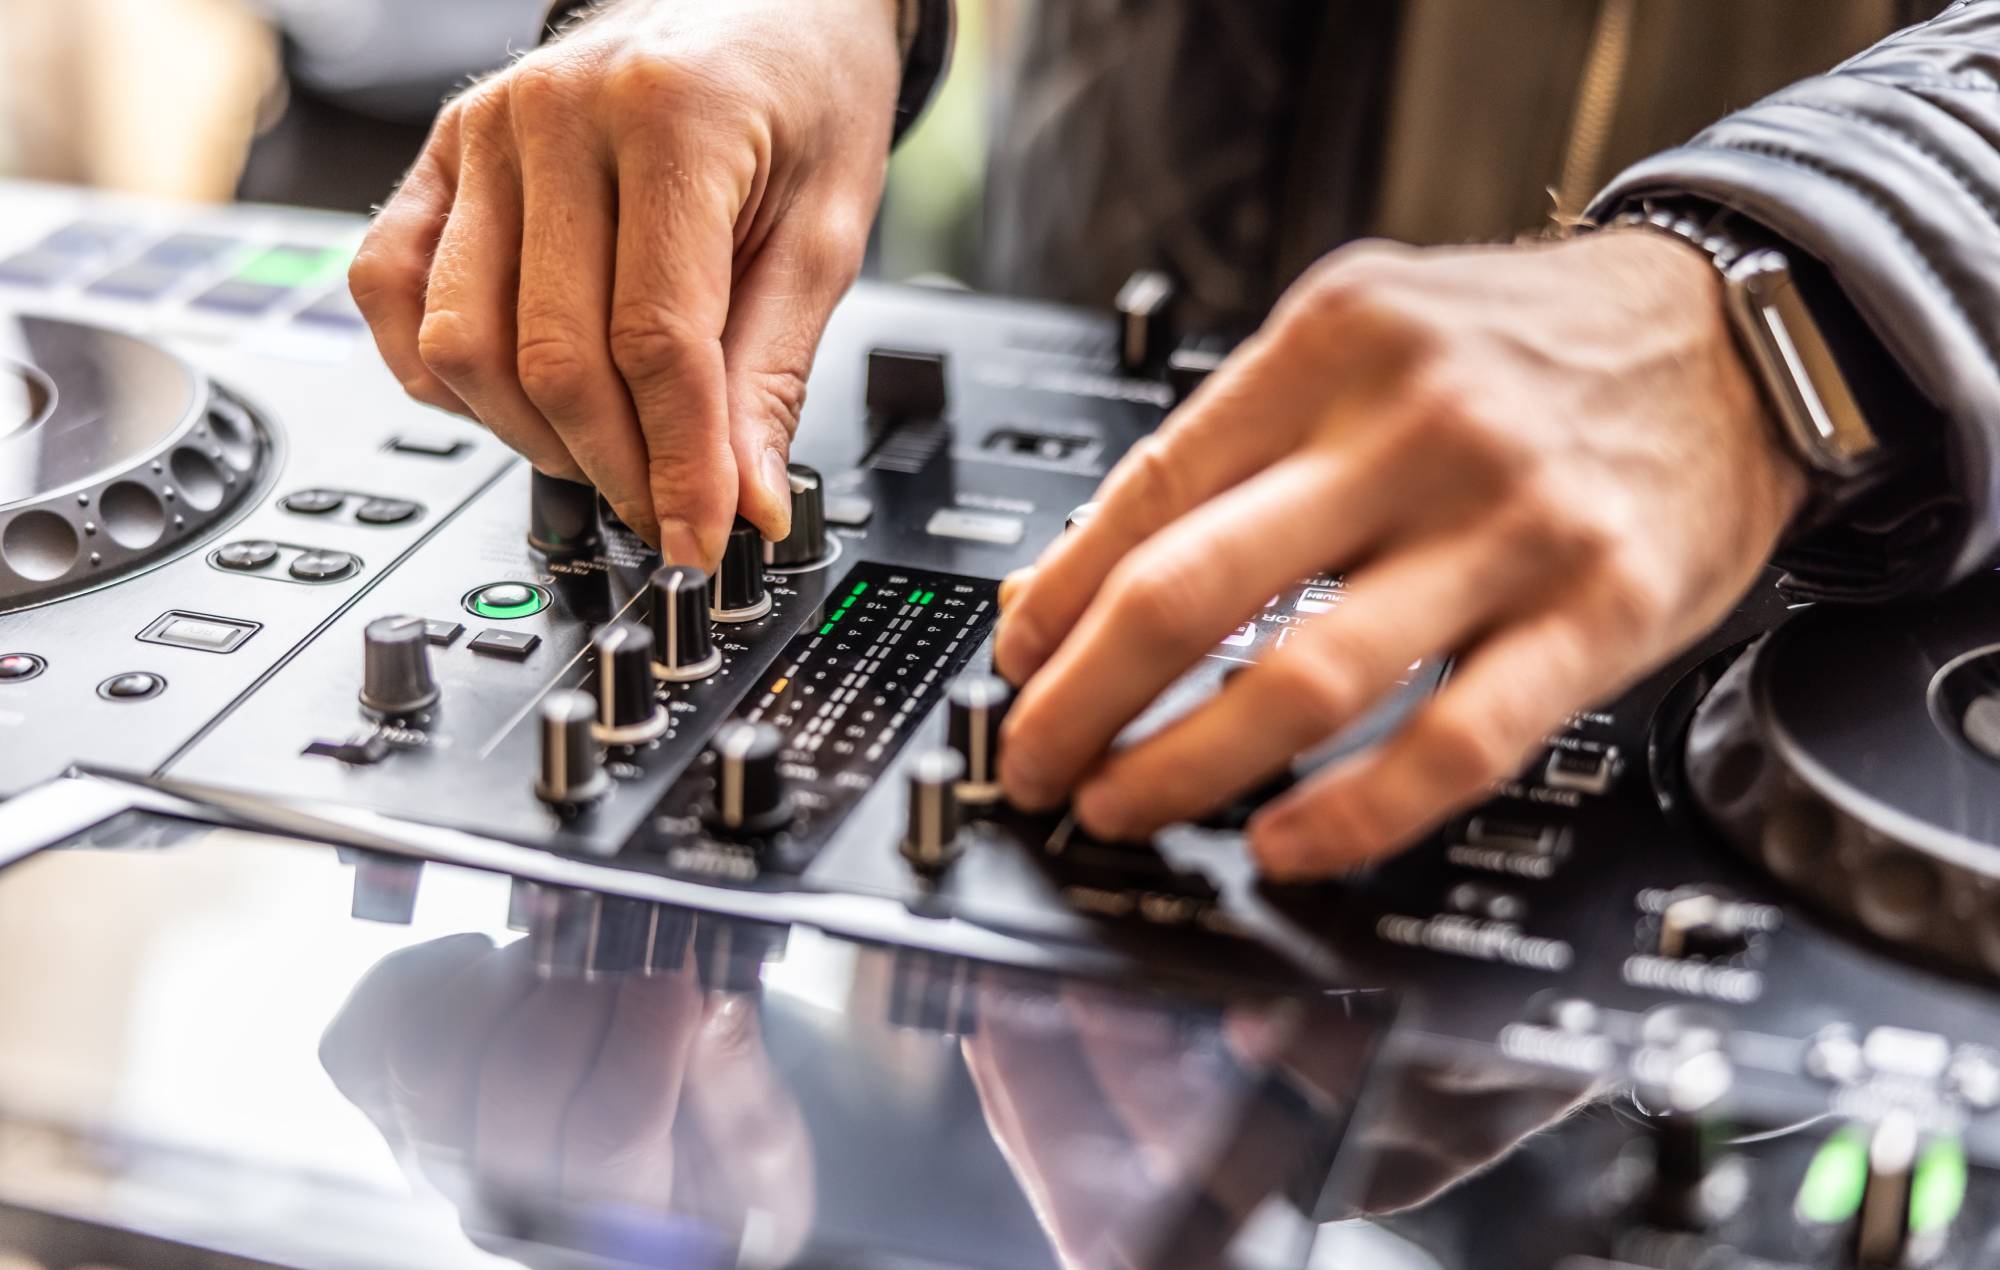 DJ hands mixing music for a night club party Credit: SimpleImages via GETTY